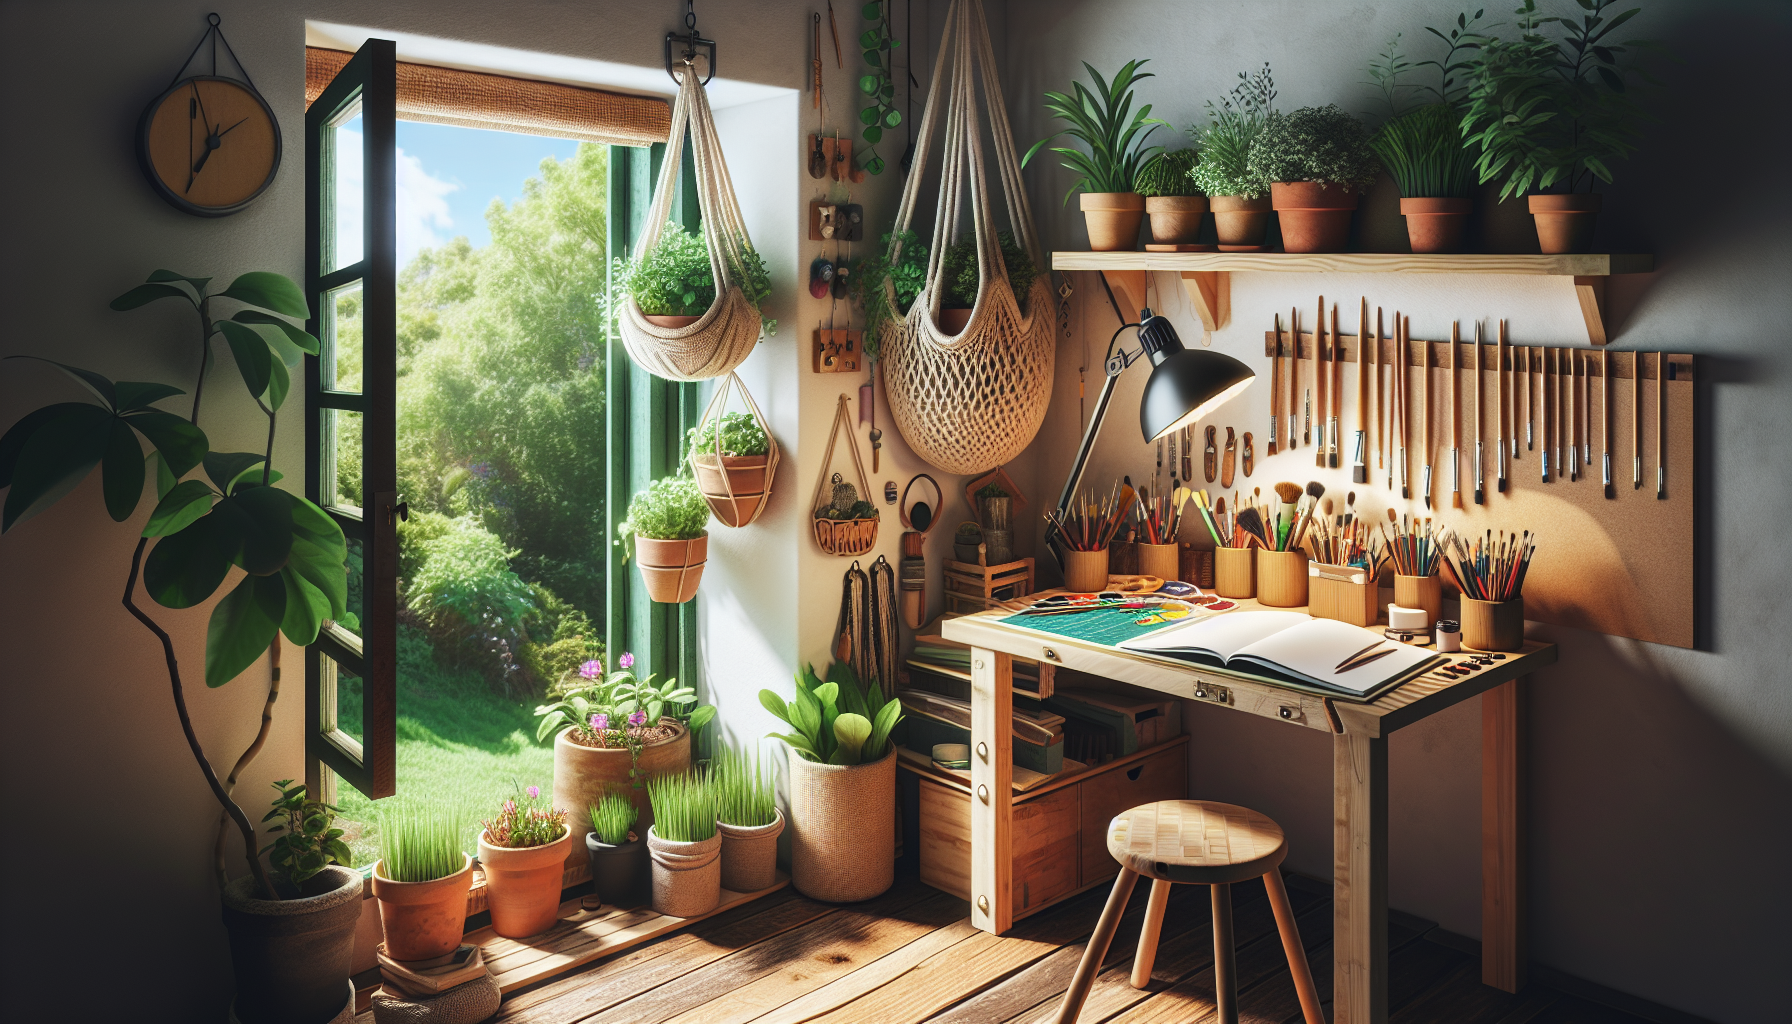 Discover how to unleash creativity in your eco-friendly hobby space